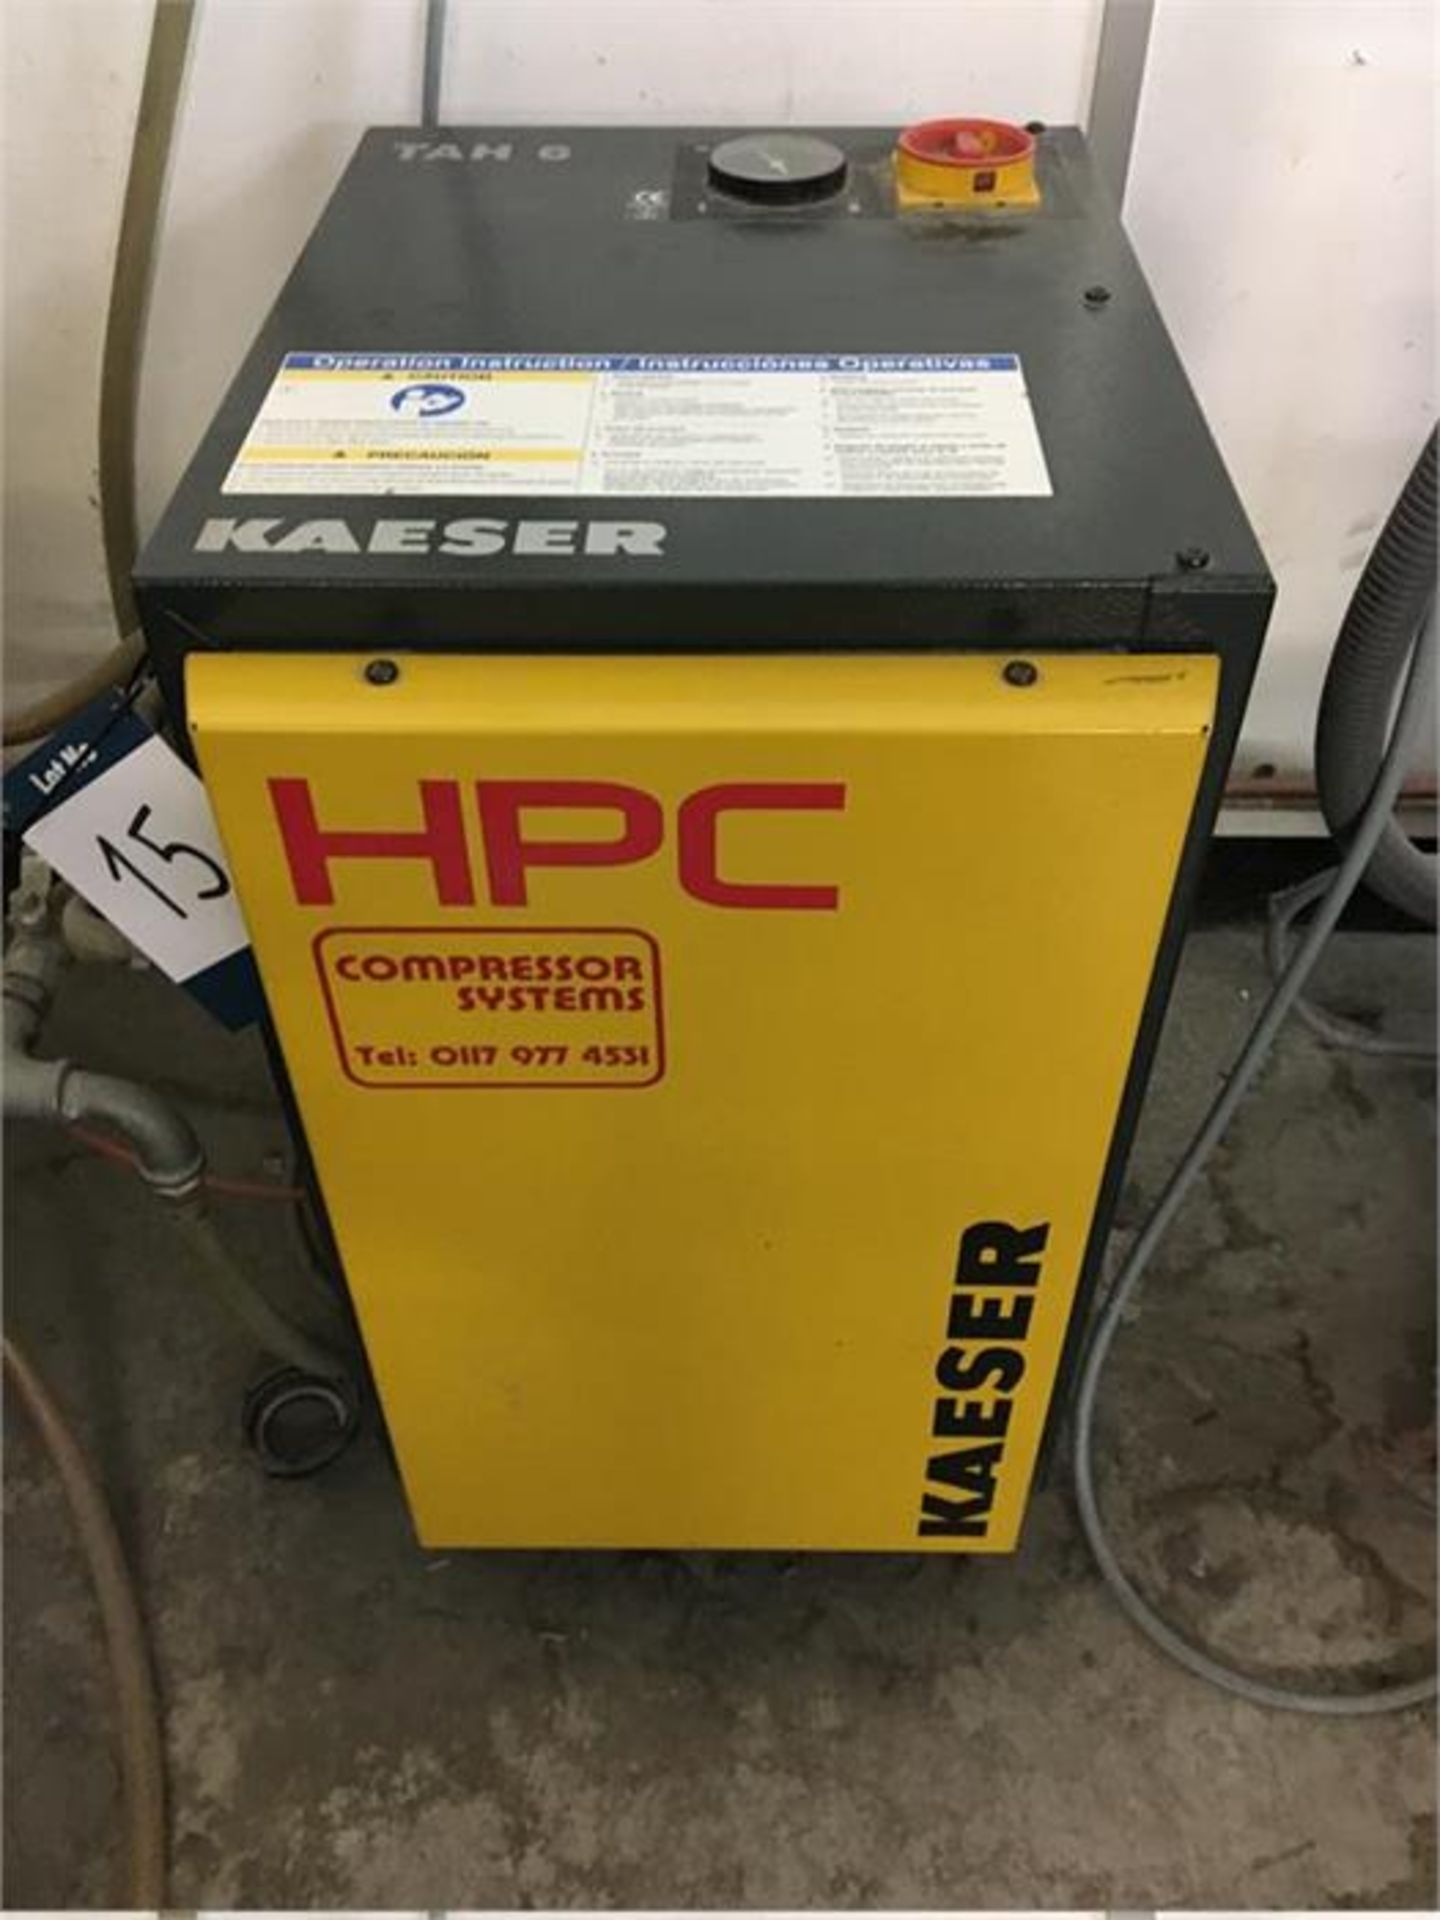 Kaeser SX6 rotary screw air compressor complete with Kaeser TAH6 dryer, Serial Number: 4330 Year: - Image 5 of 5